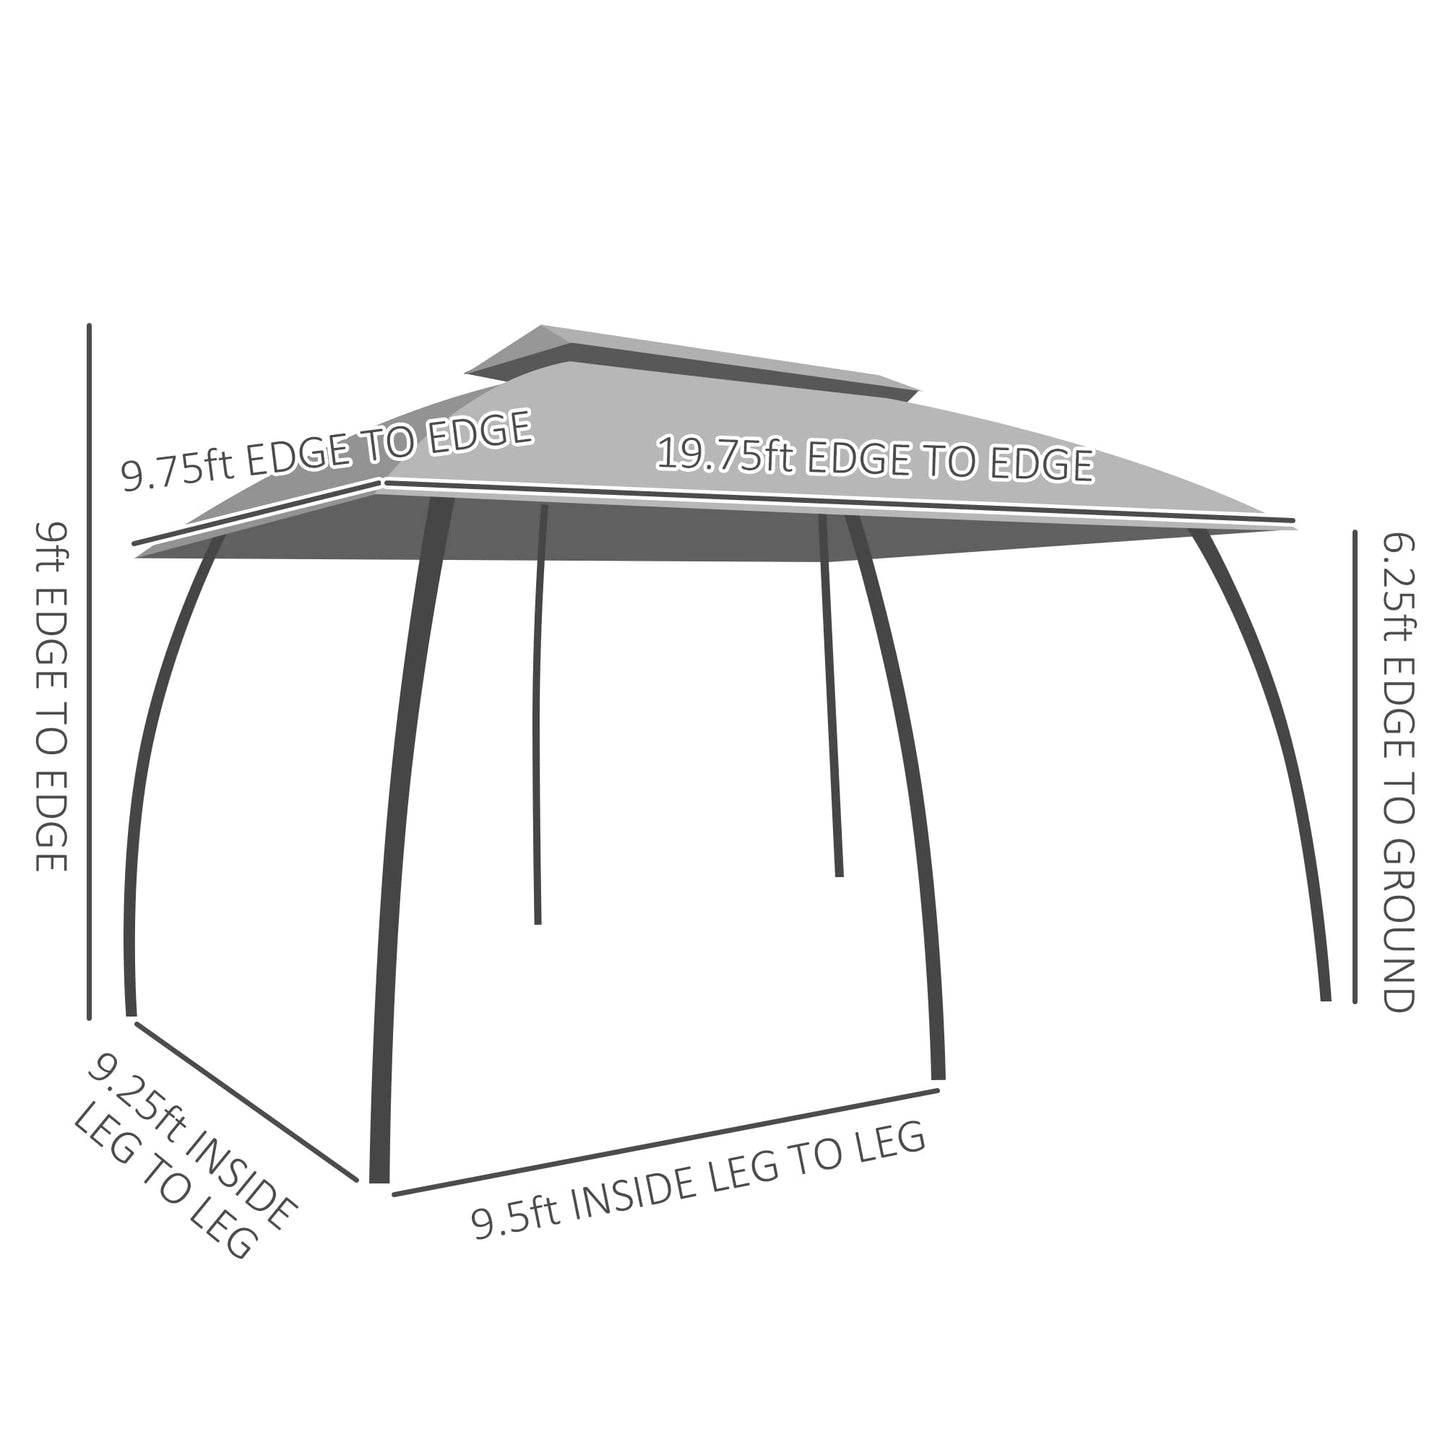 Outsunny 10' x 20' Patio Gazebo, Outdoor Gazebo Canopy Shelter with Netting, Vented Roof, Steel Frame for Garden, Lawn, Backyard, and Deck, Beige